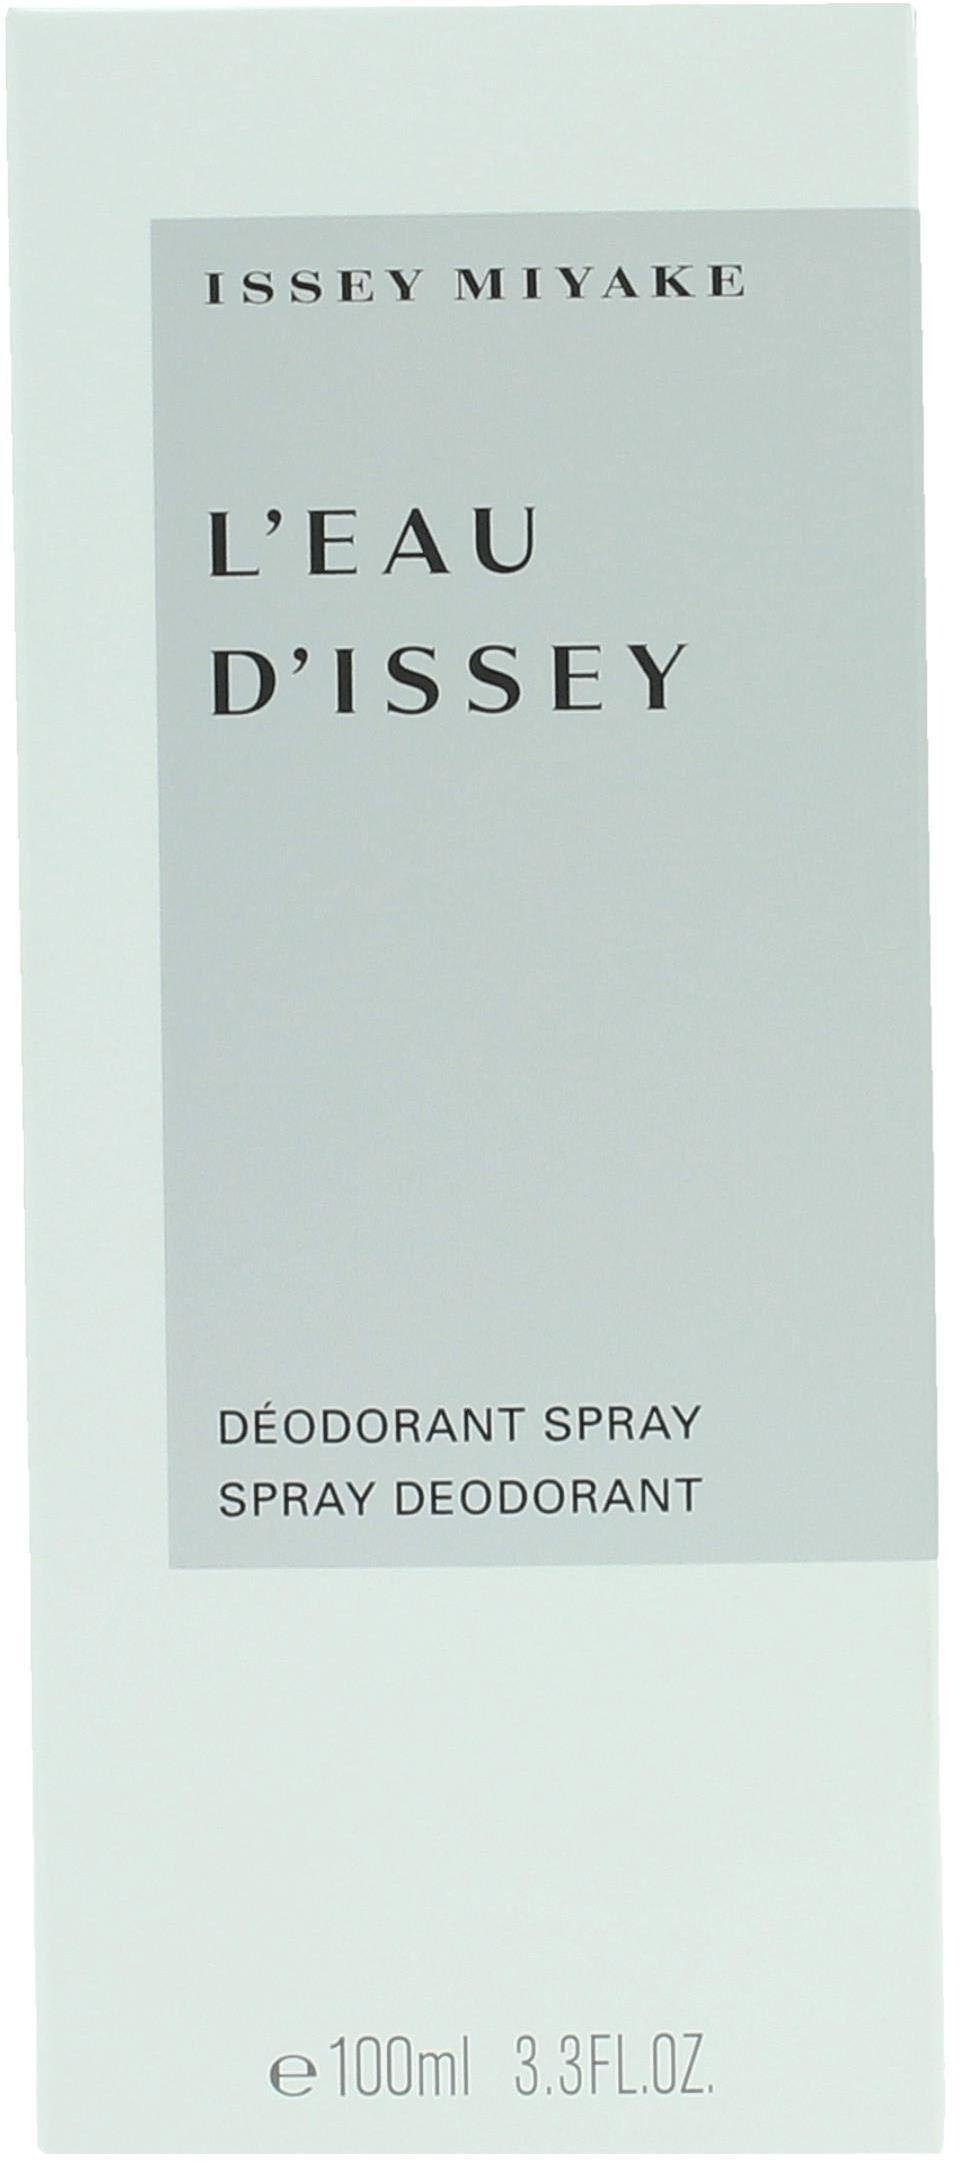 Deo-Spray L'Eau Miyake Pour Femme Issey D'Issey